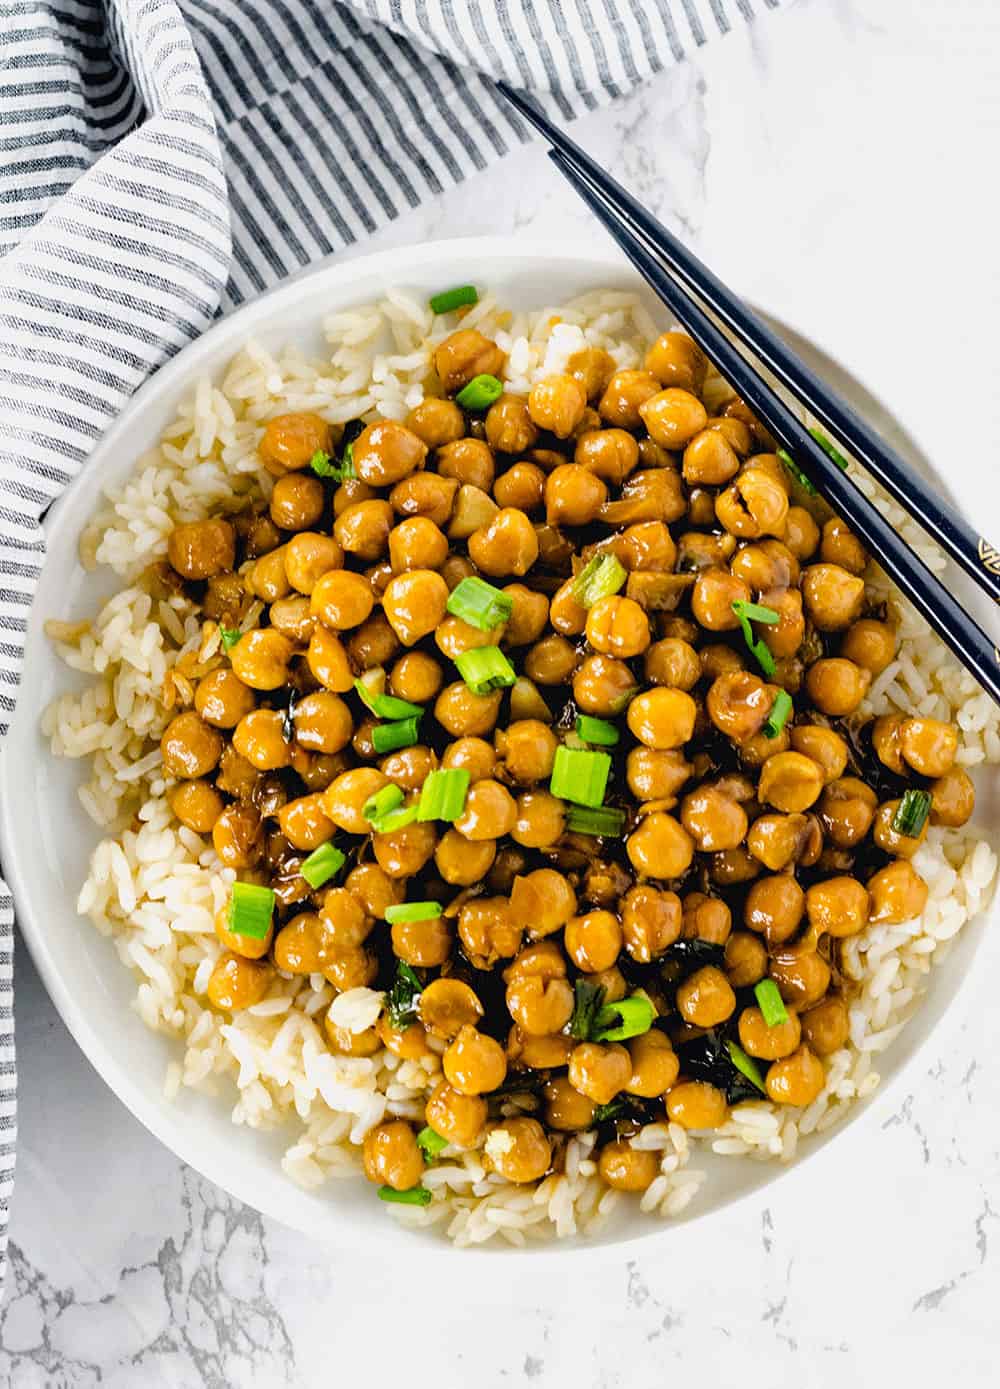 GENERAL TSO’S CHICKPEAS BY HEALTHIER STEPS